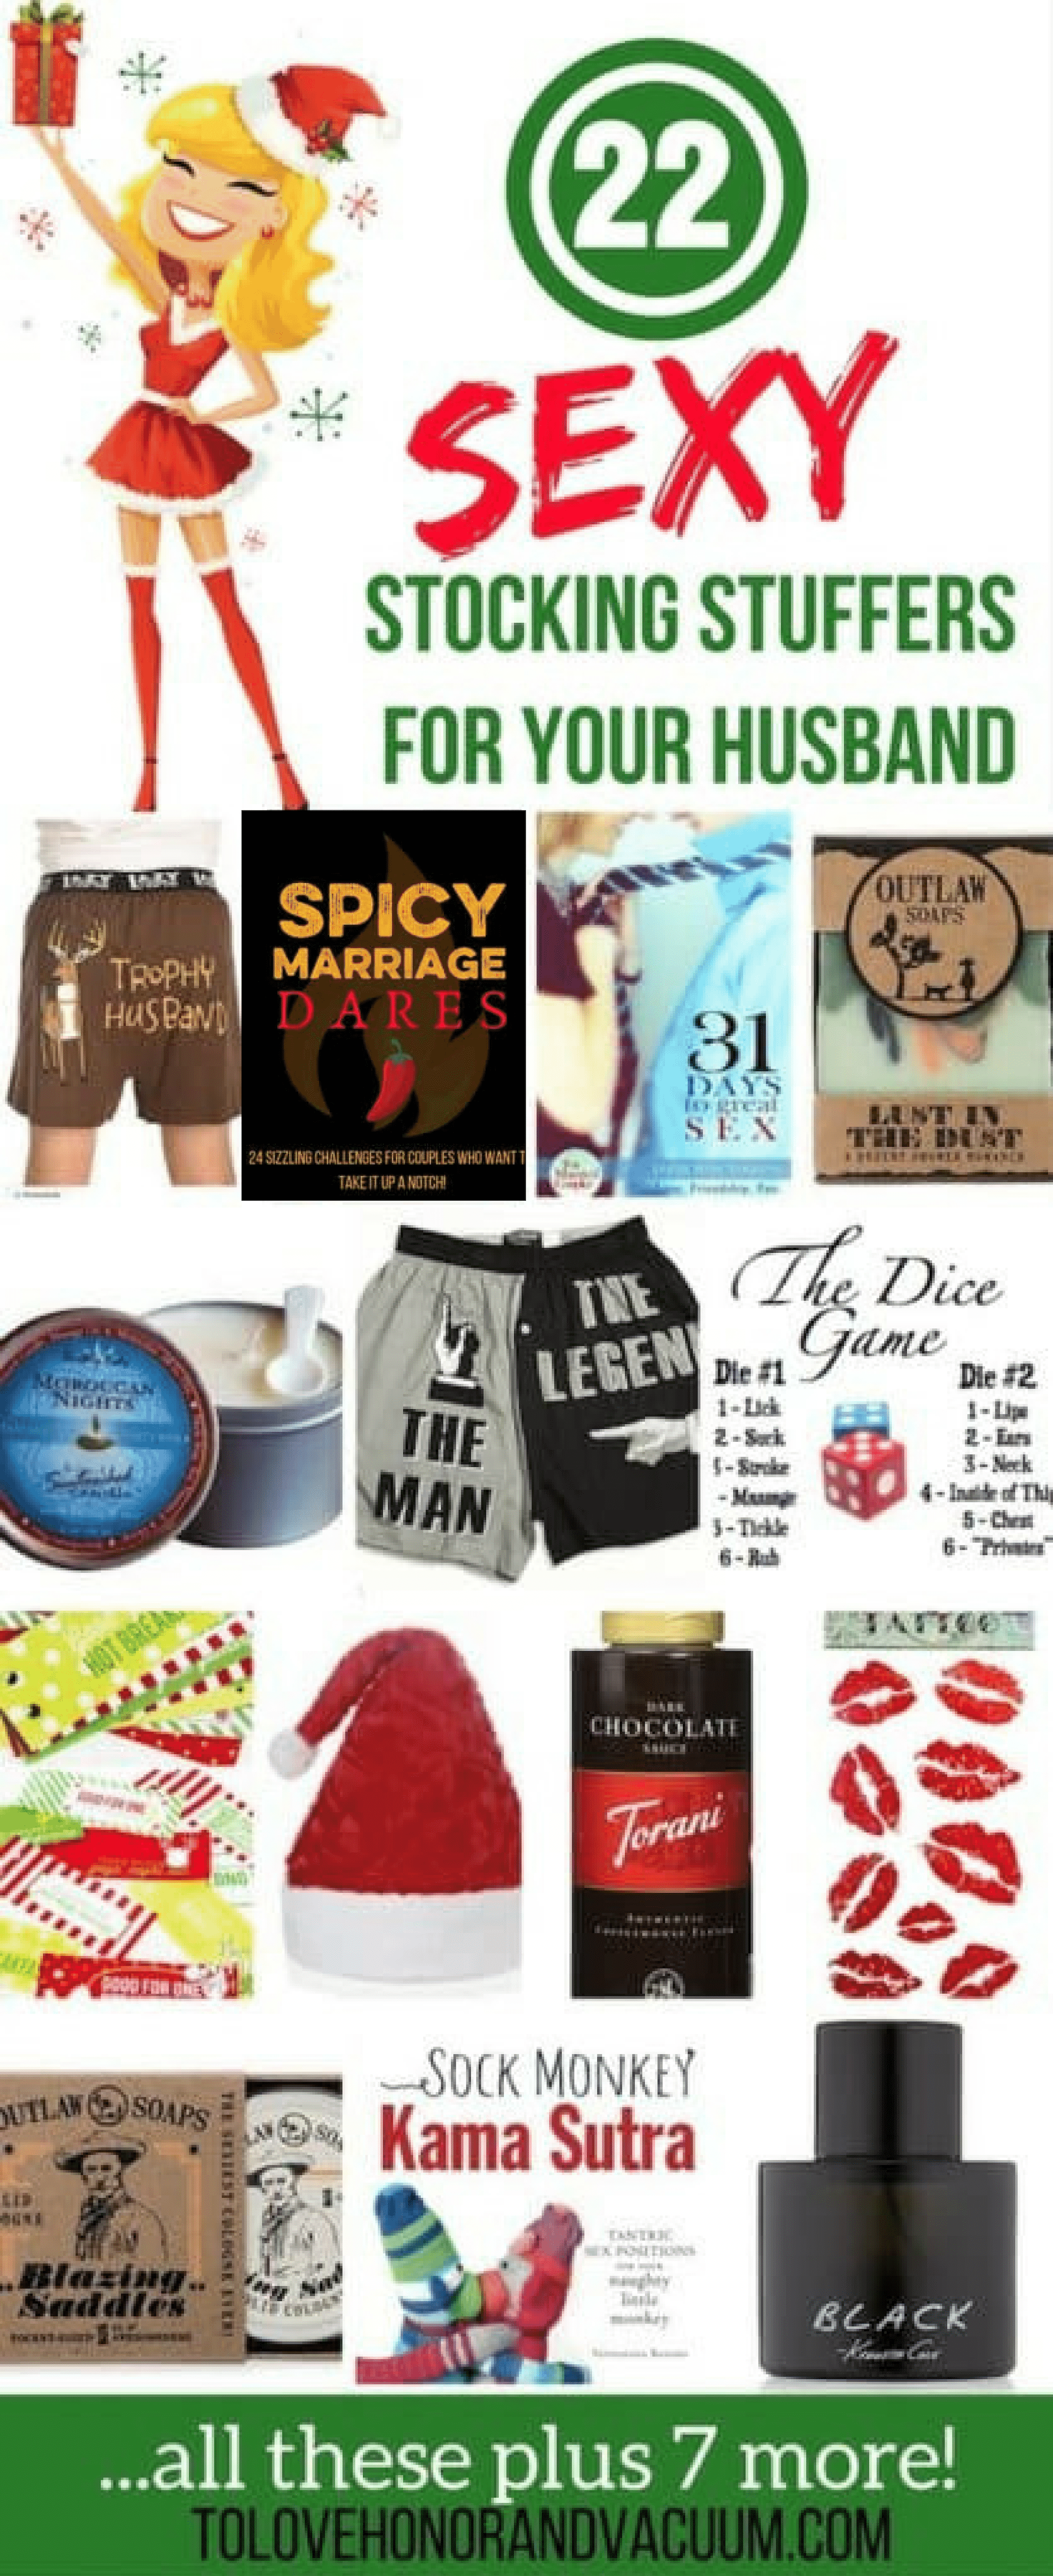 22 Sexy Stocking Stuffers for Your Husband - Bare Marriage